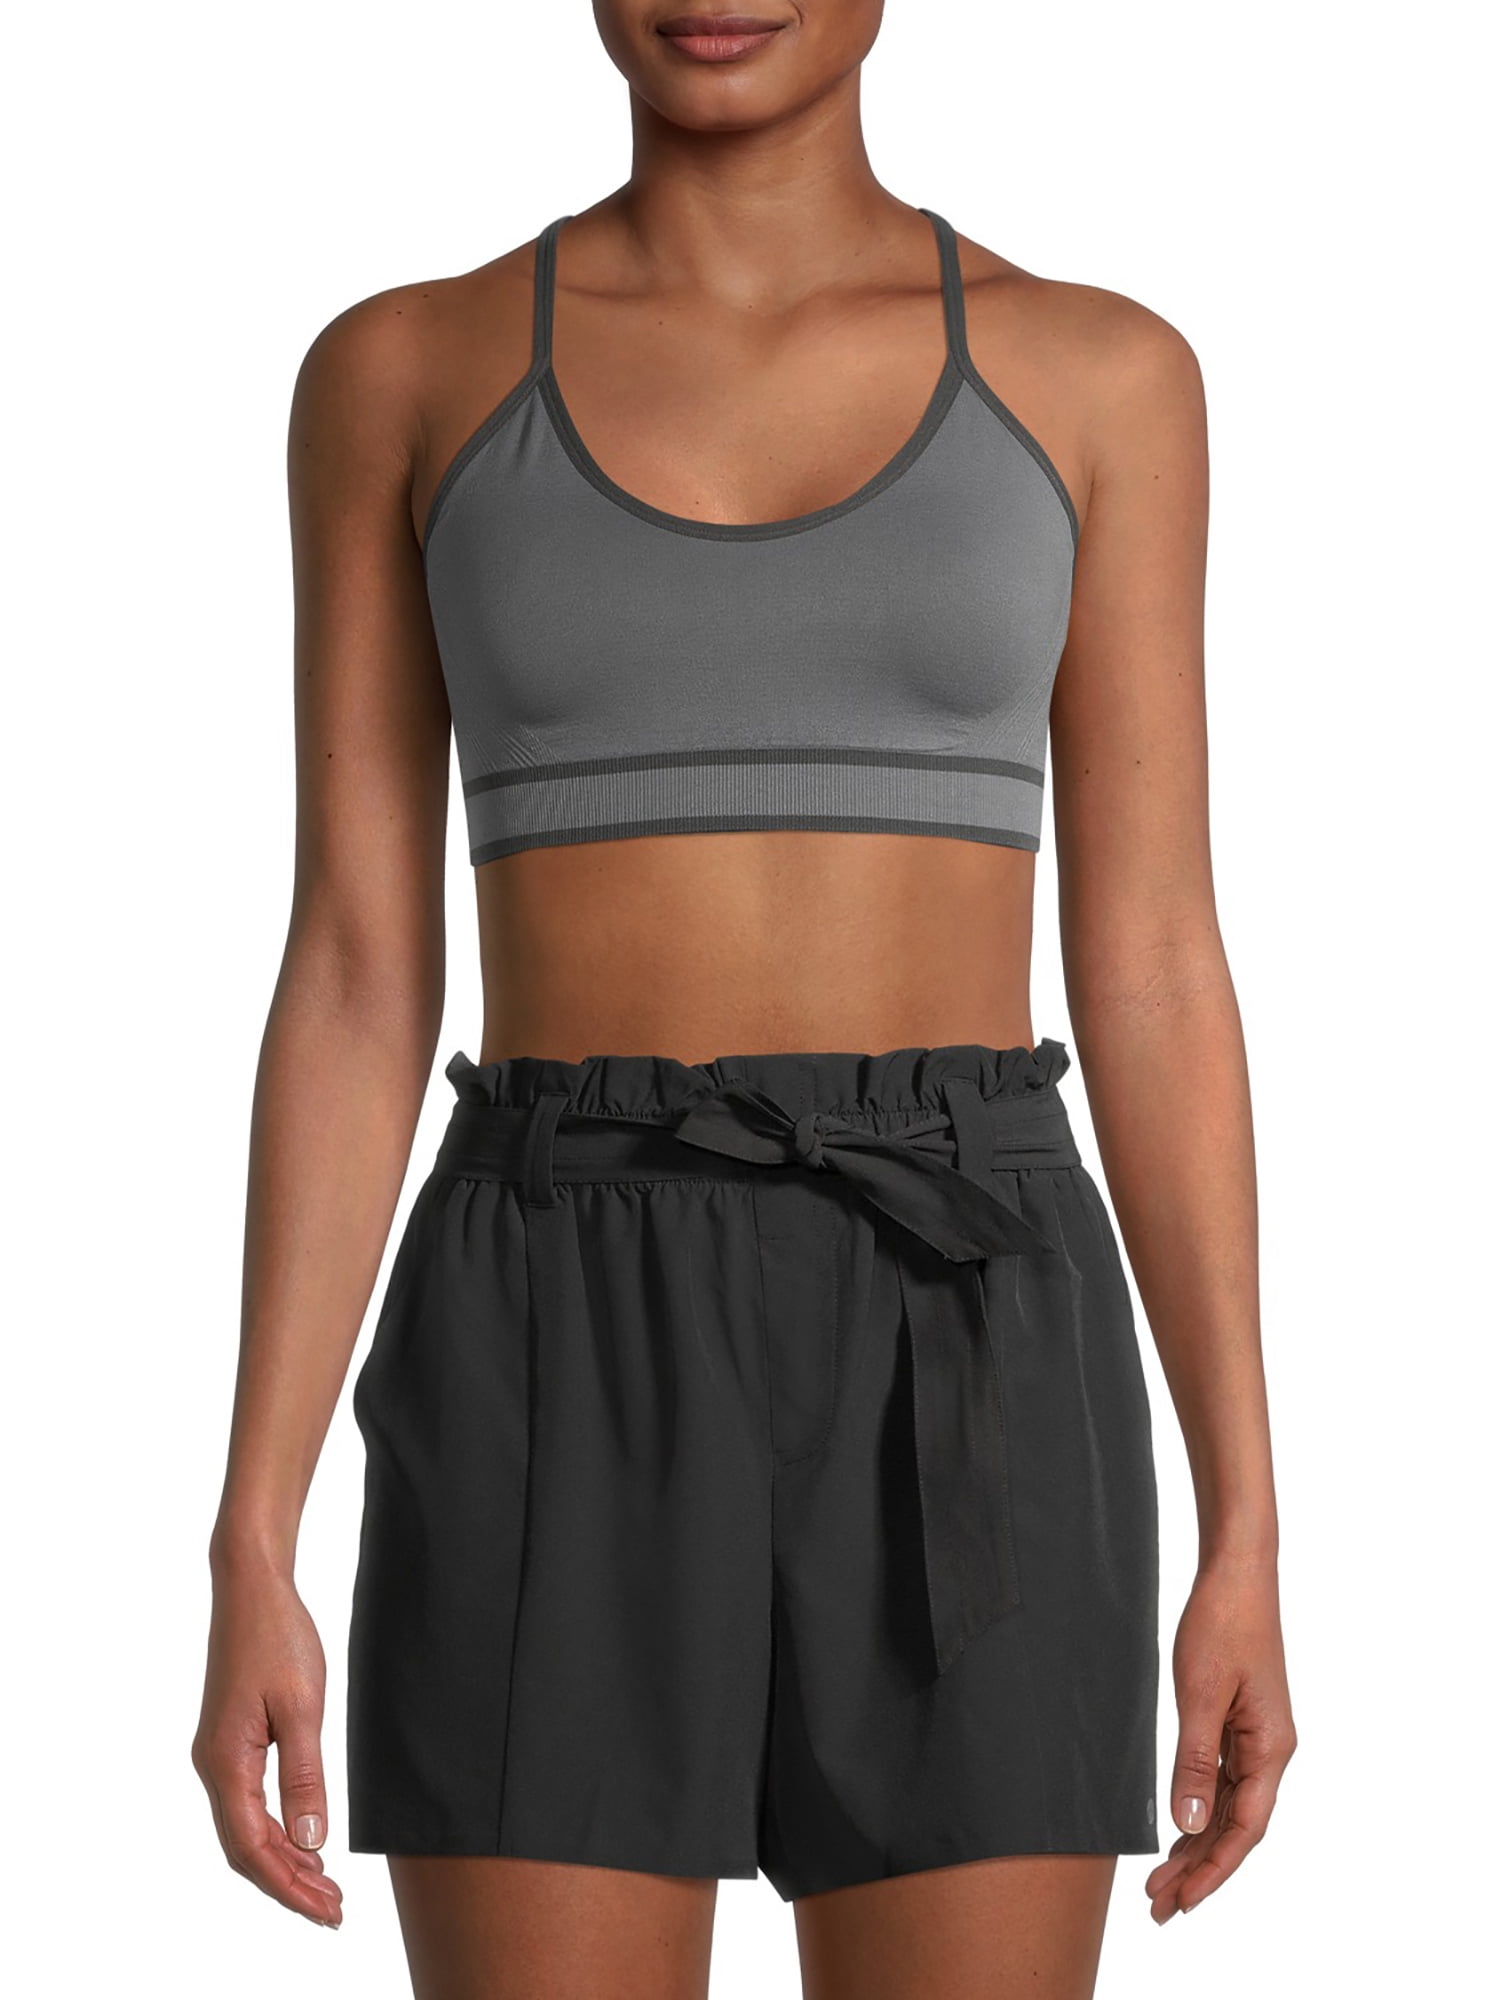 Avia Gray and Black Women's Low Support Seamless Cami Sports Bra